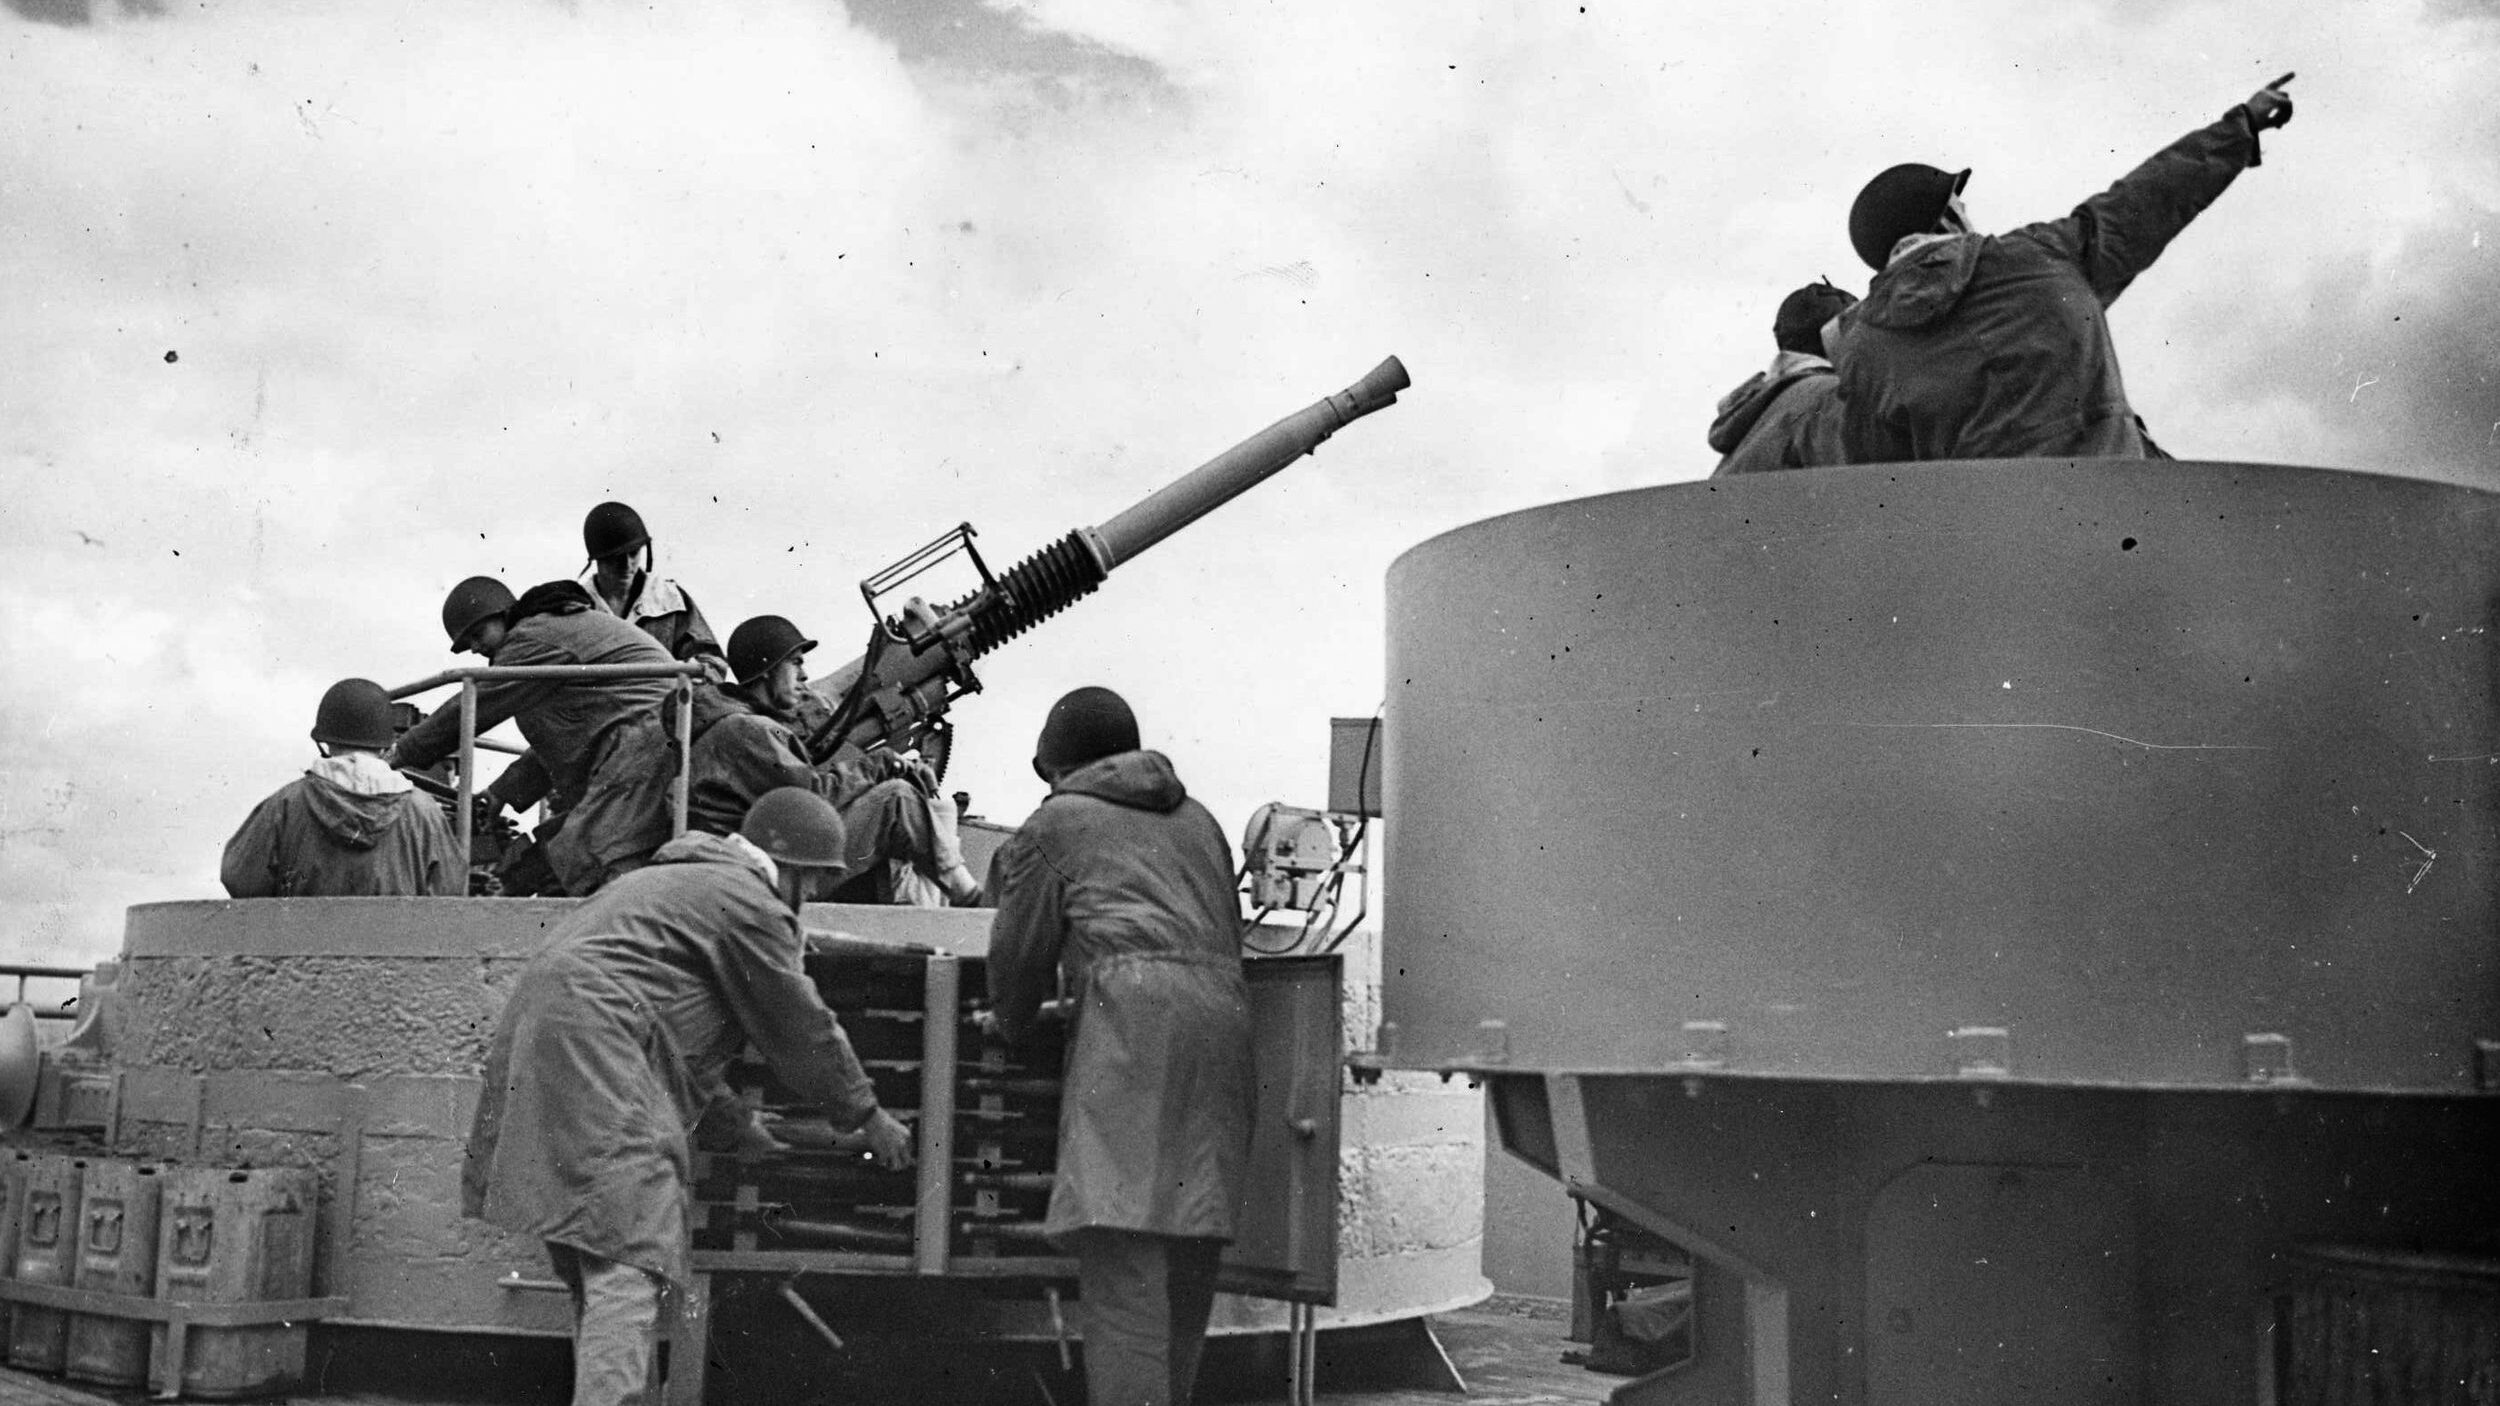 Manning a twin Bofors antiaircraft gun on the deck of the Queen Mary, a crew is put through its paces by an officer during gunnery training at sea.